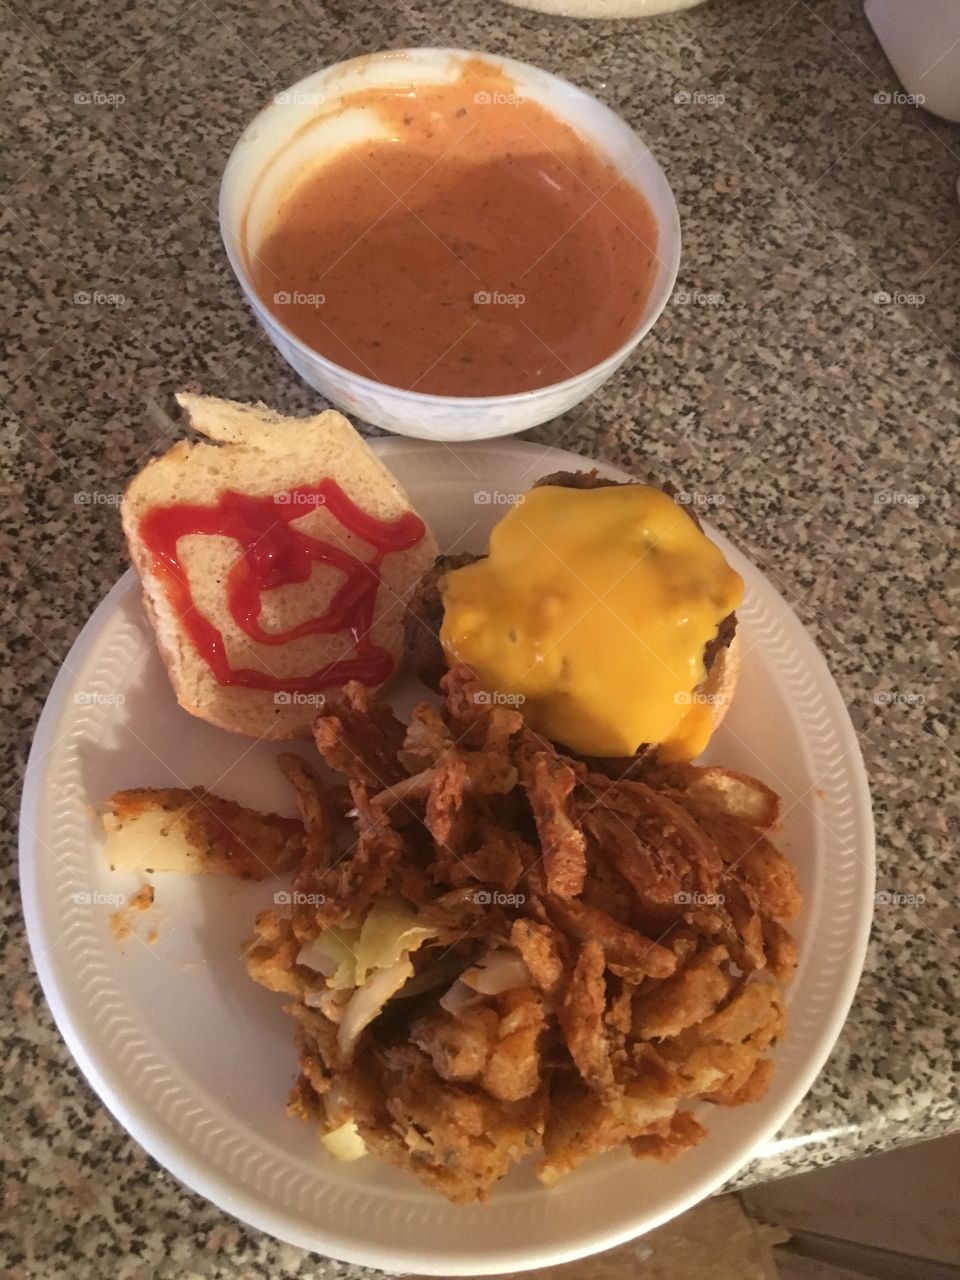 Homemade all by me cheeseburger with Blooming Onion and Sauce 